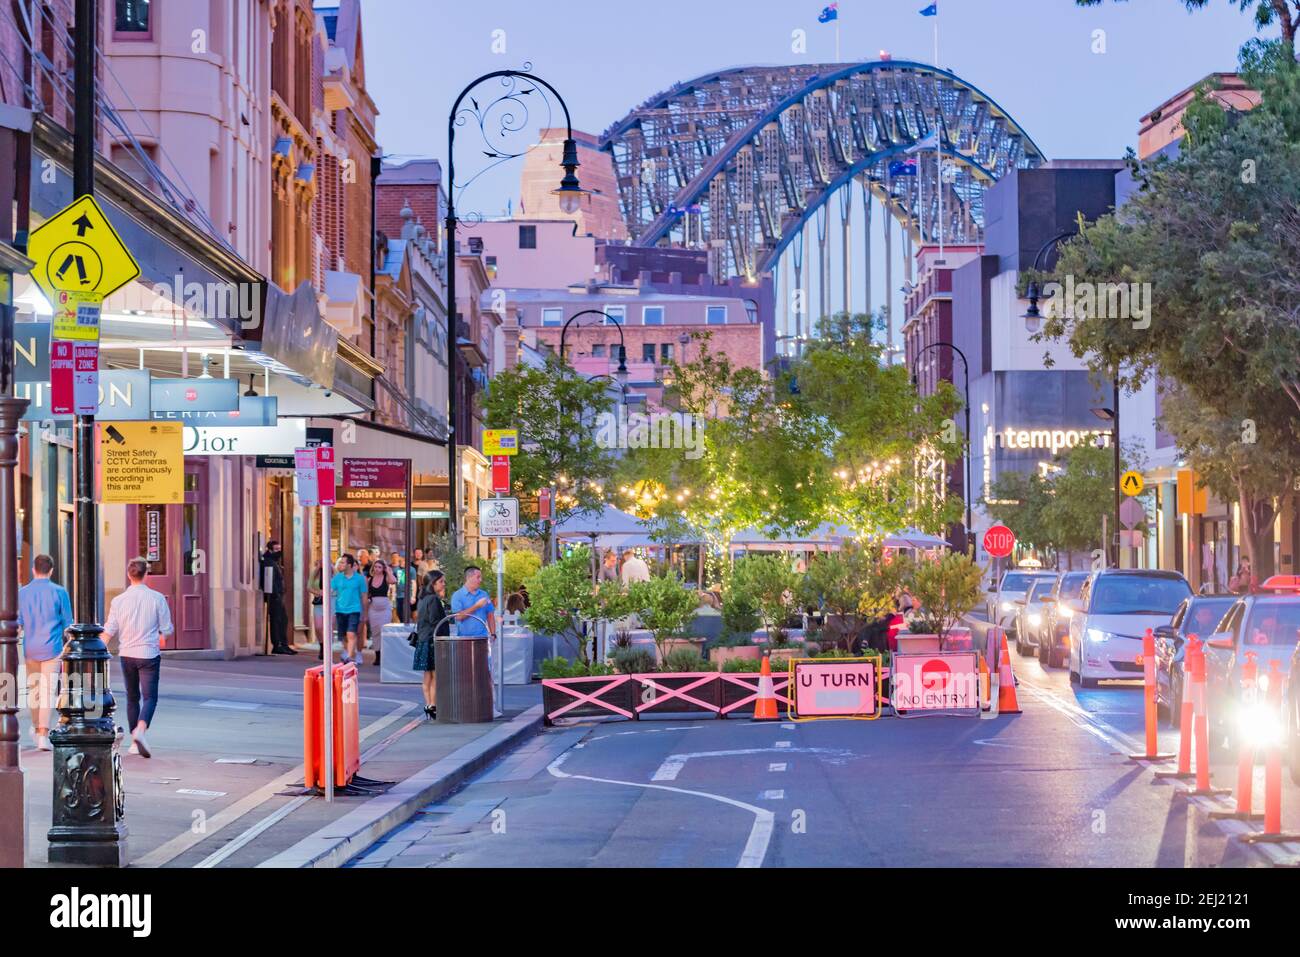 Dec 2020, Syd Aust: Part of a street in the Rocks area in harbourside Sydney has been blocked to allow safer alfresco dining during the Covid pandemic Stock Photo